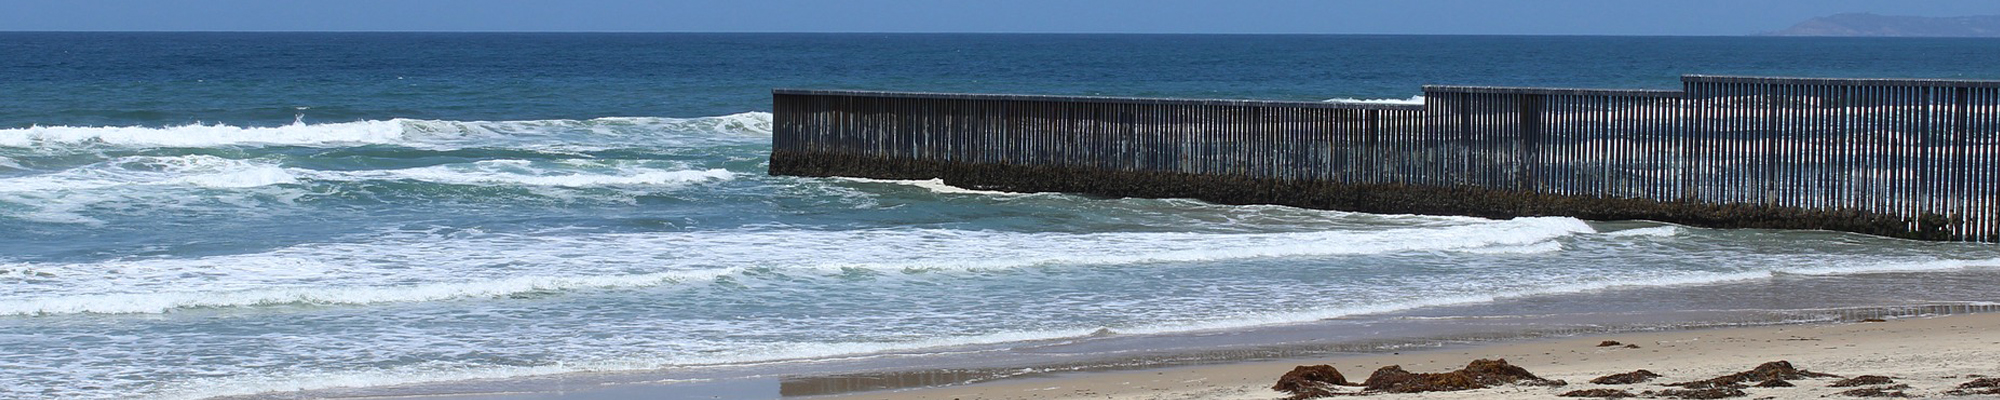 border fence in ocean between Mexico and San Diego